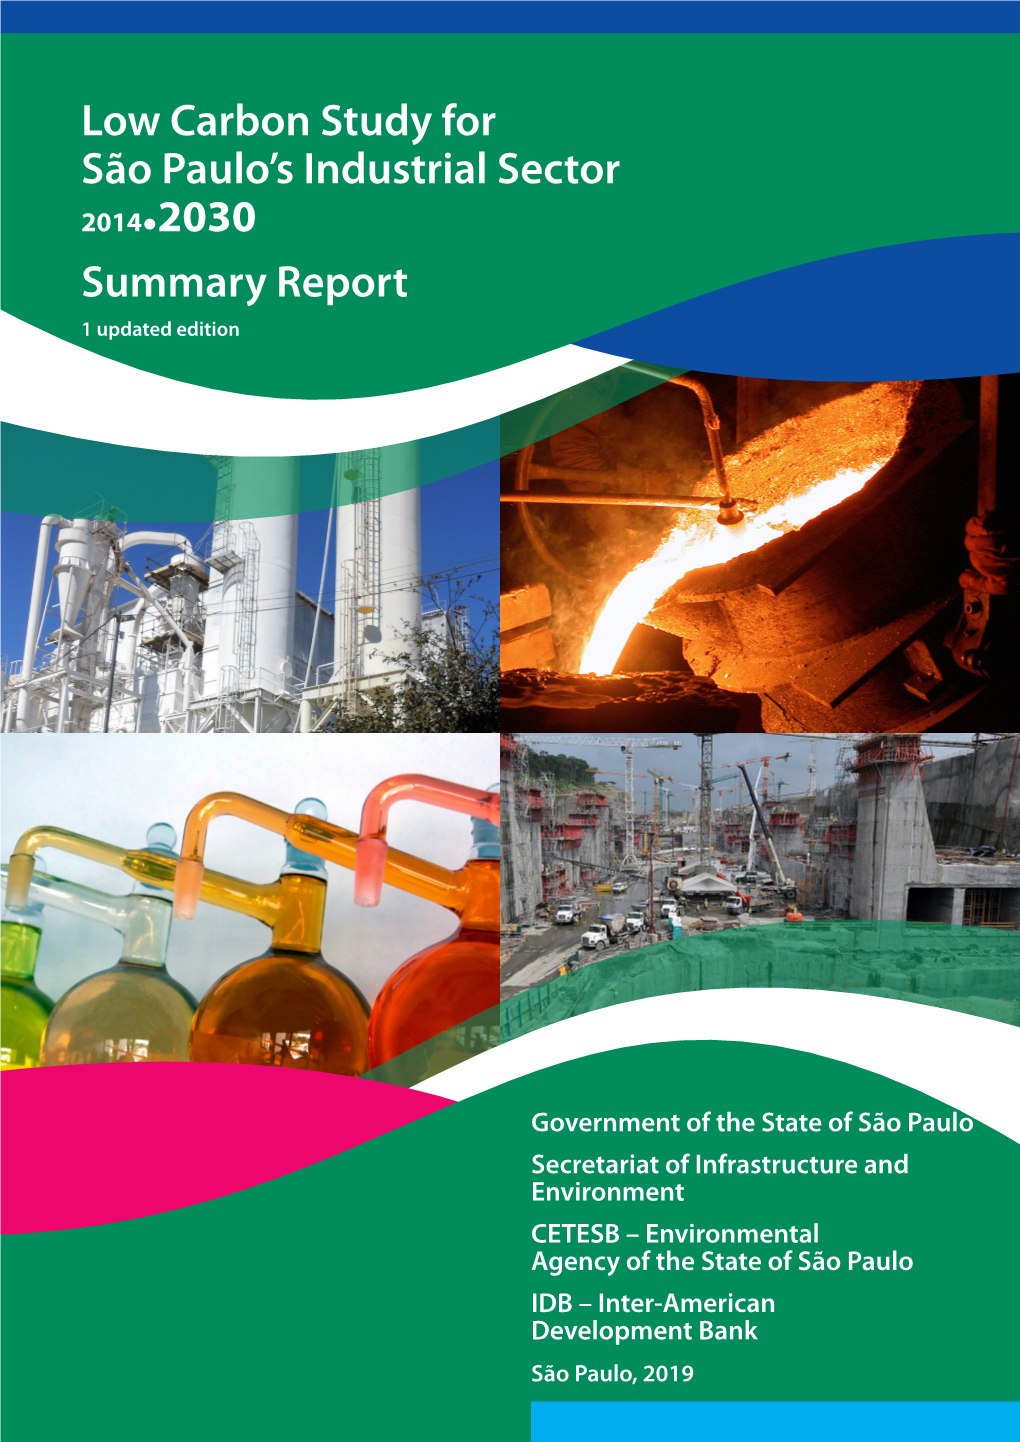 Low Carbon Study for São Paulo's Industrial Sector Summary Report